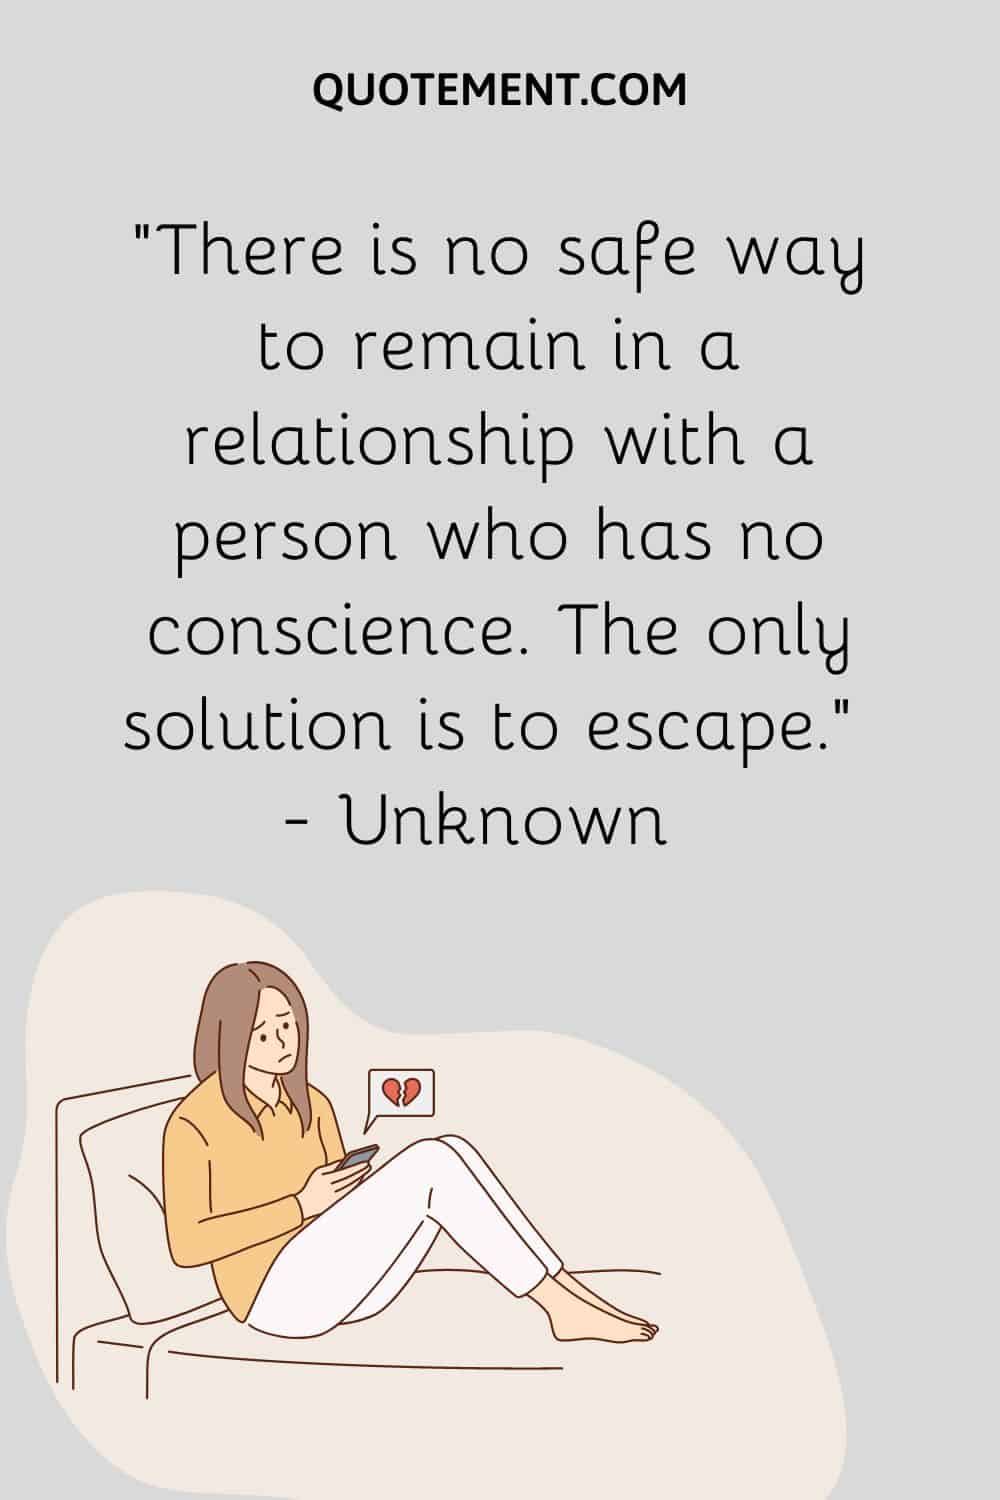 There is no safe way to remain in a relationship with a person who has no conscience